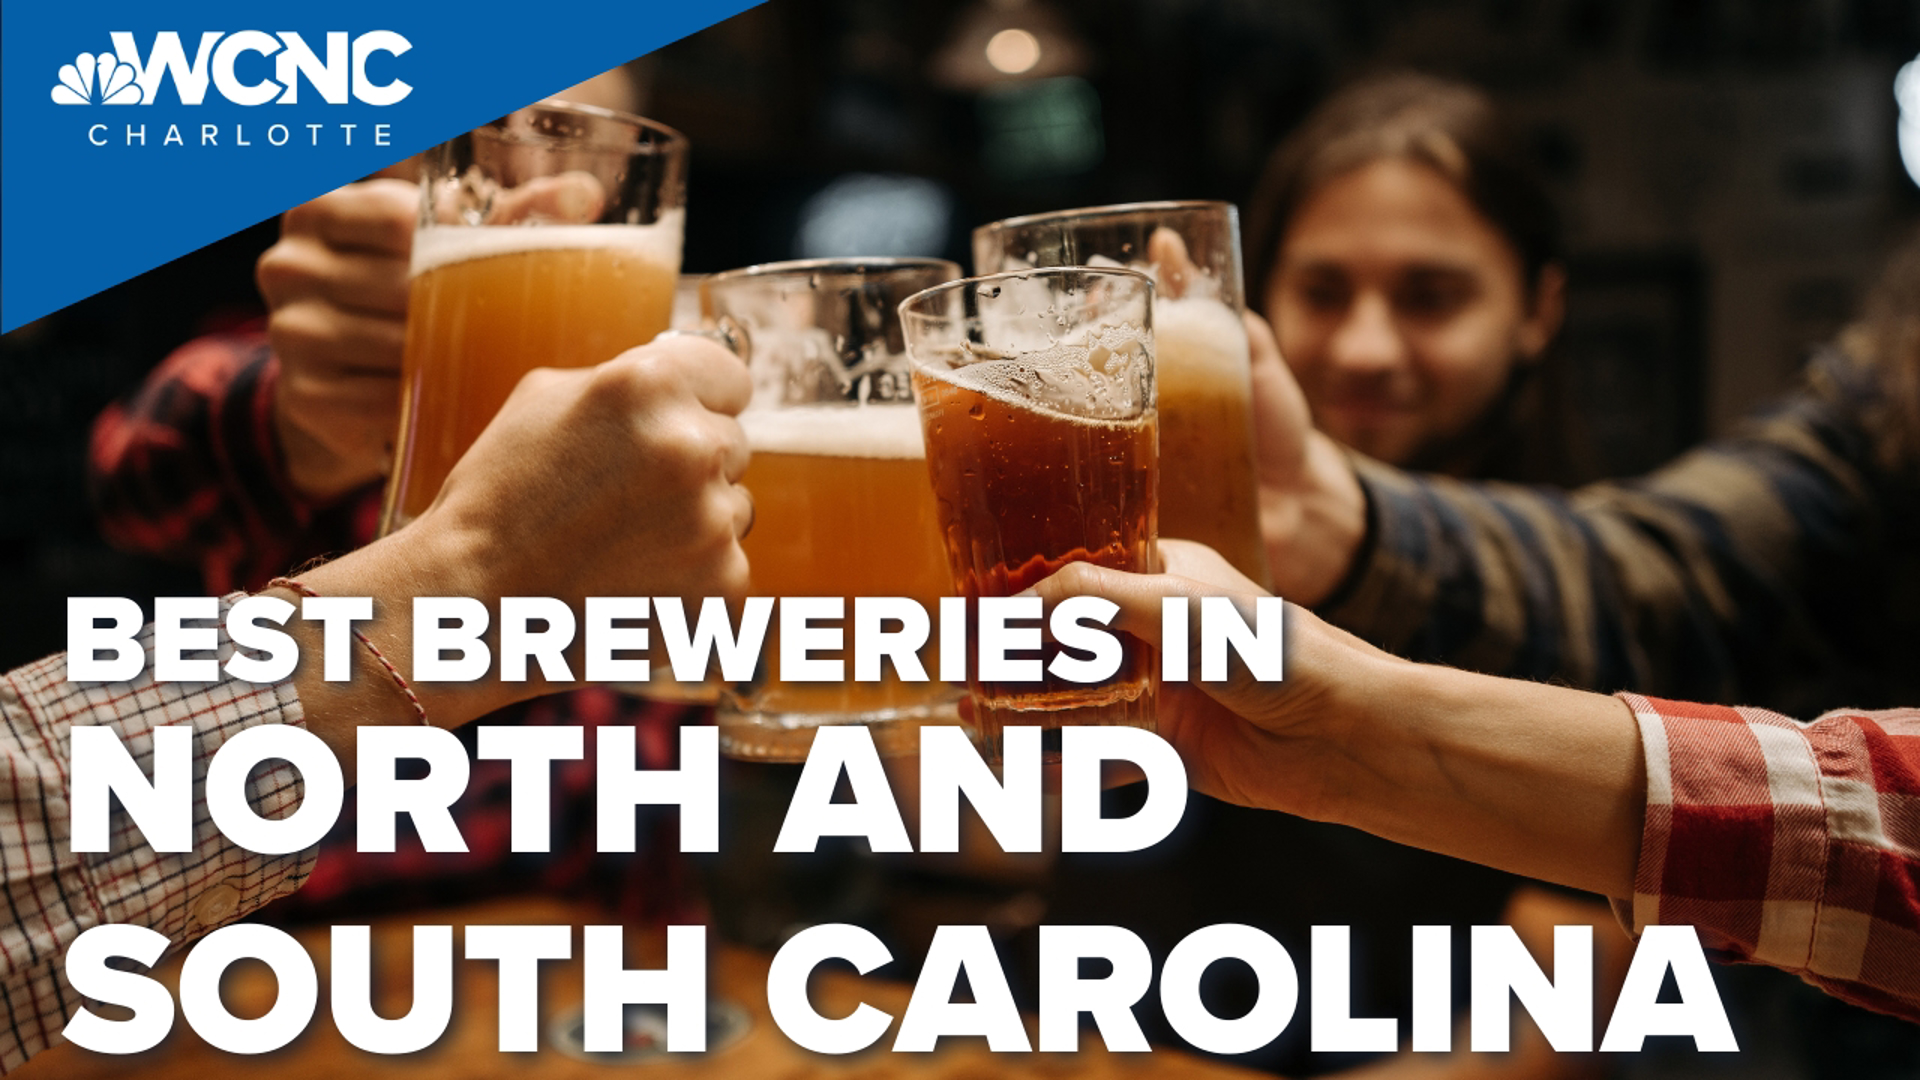 According to Yelp, the best brewery in North Carolina is Whistle Hop Brewing Company. In South Carolina, Yelp ranked Low Tide Brewing at the top.